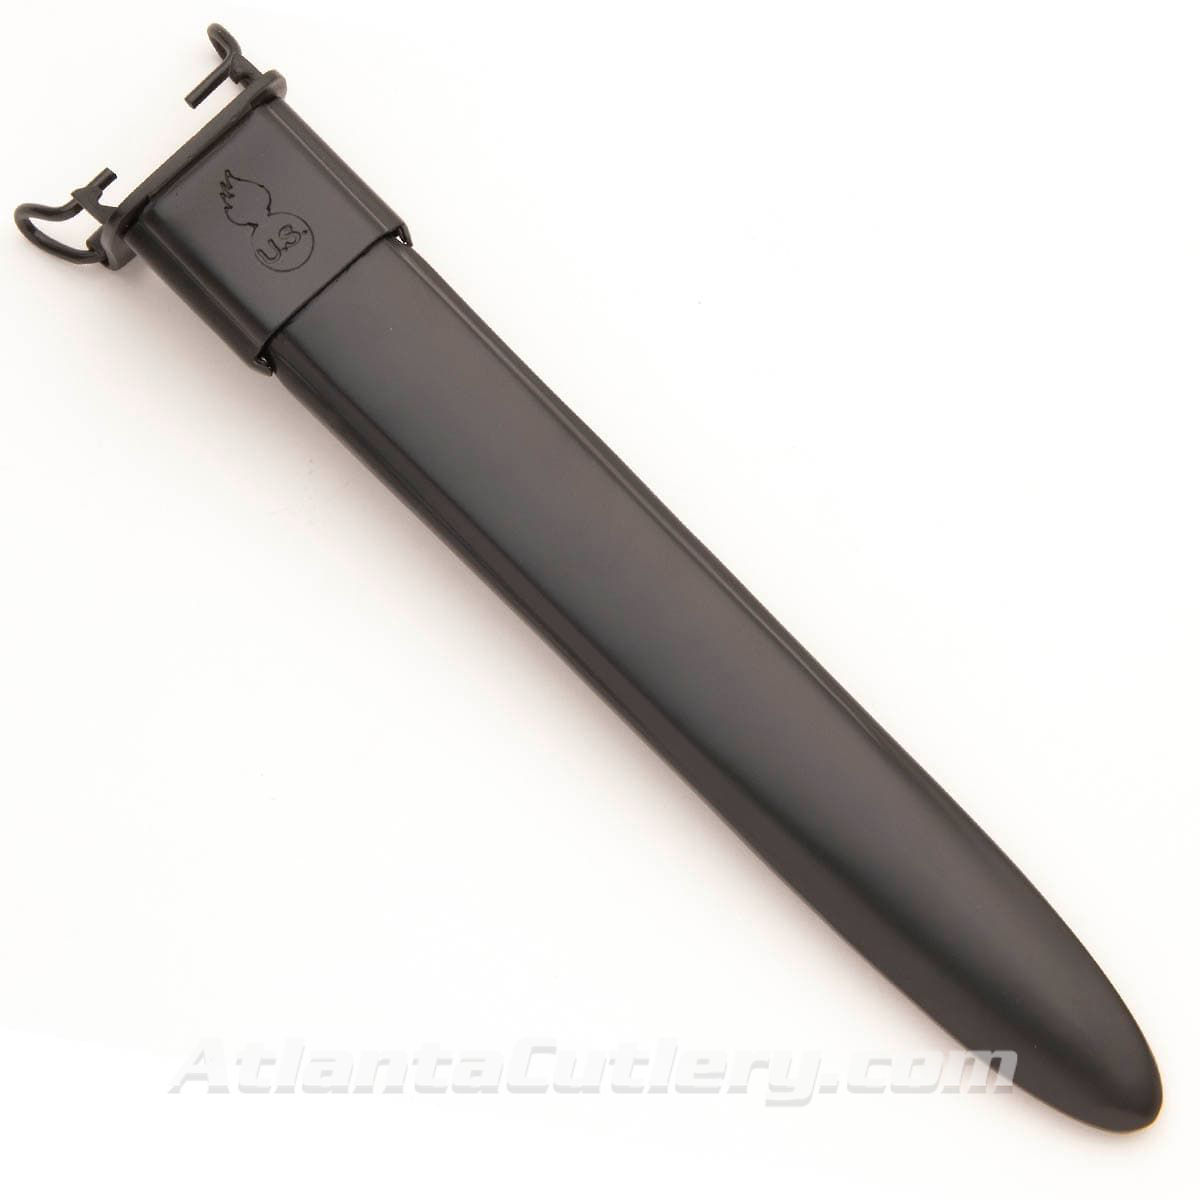 Reproduction M7 Scabbard for a10” M1 Bayonet is made of hard black plastic in black and has a metal top and belt hanger